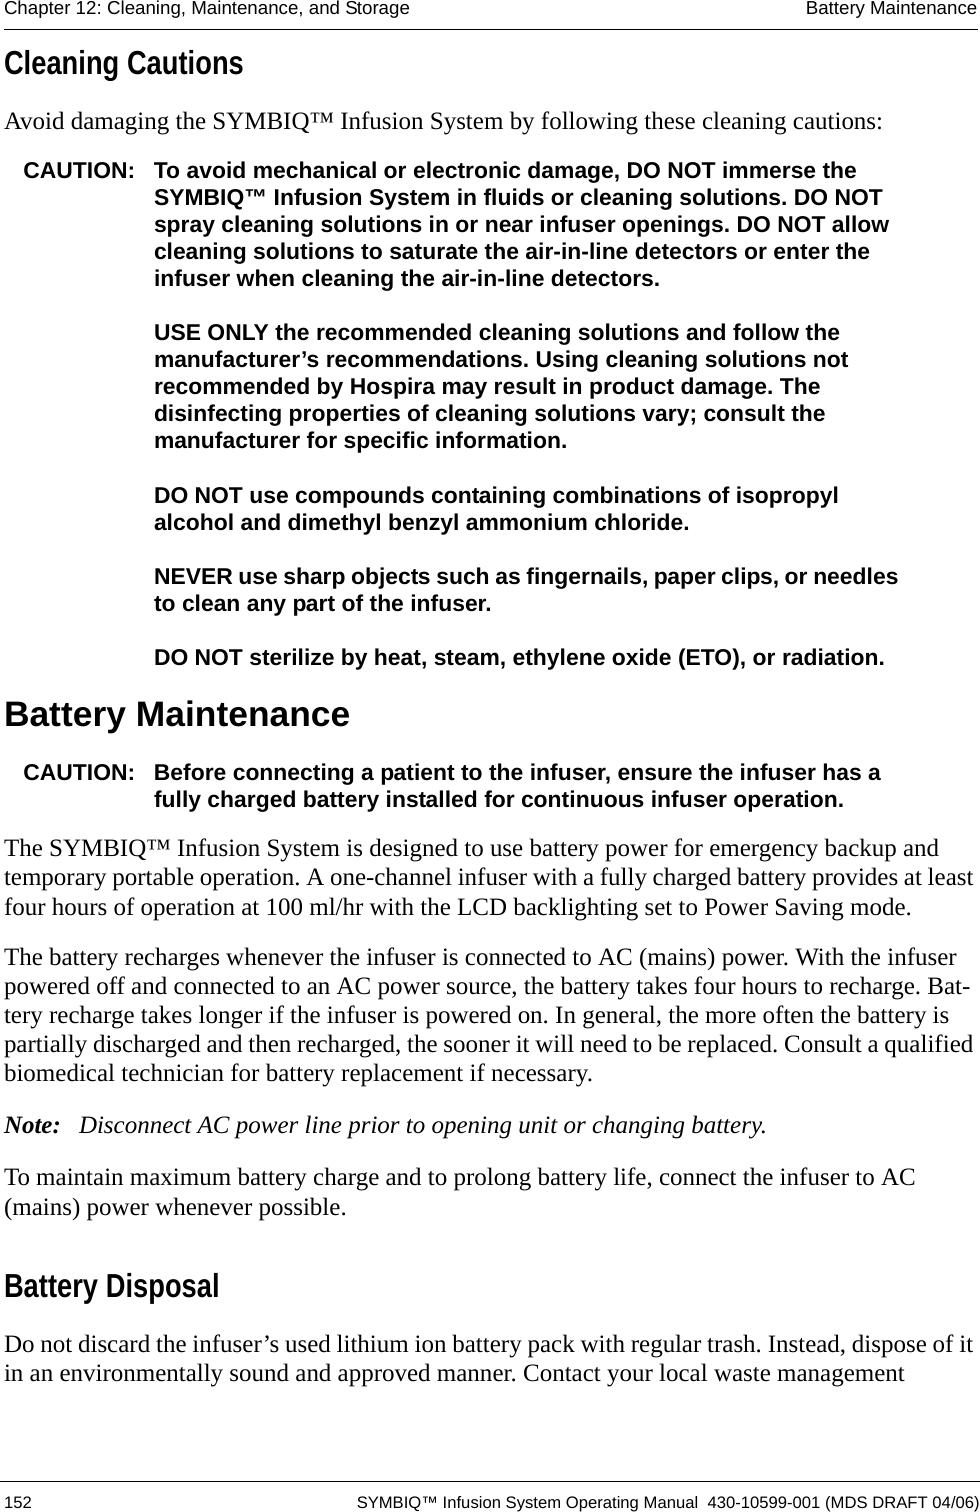  152 SYMBIQ™ Infusion System Operating Manual  430-10599-001 (MDS DRAFT 04/06)Chapter 12: Cleaning, Maintenance, and Storage Battery MaintenanceCleaning CautionsAvoid damaging the SYMBIQ™ Infusion System by following these cleaning cautions:CAUTION: To avoid mechanical or electronic damage, DO NOT immerse the SYMBIQ™ Infusion System in fluids or cleaning solutions. DO NOT spray cleaning solutions in or near infuser openings. DO NOT allow cleaning solutions to saturate the air-in-line detectors or enter the infuser when cleaning the air-in-line detectors.USE ONLY the recommended cleaning solutions and follow the manufacturer’s recommendations. Using cleaning solutions not recommended by Hospira may result in product damage. The disinfecting properties of cleaning solutions vary; consult the manufacturer for specific information.DO NOT use compounds containing combinations of isopropyl alcohol and dimethyl benzyl ammonium chloride.NEVER use sharp objects such as fingernails, paper clips, or needles to clean any part of the infuser.DO NOT sterilize by heat, steam, ethylene oxide (ETO), or radiation.Battery MaintenanceCAUTION: Before connecting a patient to the infuser, ensure the infuser has a fully charged battery installed for continuous infuser operation.The SYMBIQ™ Infusion System is designed to use battery power for emergency backup and temporary portable operation. A one-channel infuser with a fully charged battery provides at least four hours of operation at 100 ml/hr with the LCD backlighting set to Power Saving mode. The battery recharges whenever the infuser is connected to AC (mains) power. With the infuser powered off and connected to an AC power source, the battery takes four hours to recharge. Bat-tery recharge takes longer if the infuser is powered on. In general, the more often the battery is partially discharged and then recharged, the sooner it will need to be replaced. Consult a qualified biomedical technician for battery replacement if necessary.Note: Disconnect AC power line prior to opening unit or changing battery.To maintain maximum battery charge and to prolong battery life, connect the infuser to AC (mains) power whenever possible. Battery DisposalDo not discard the infuser’s used lithium ion battery pack with regular trash. Instead, dispose of it in an environmentally sound and approved manner. Contact your local waste management 